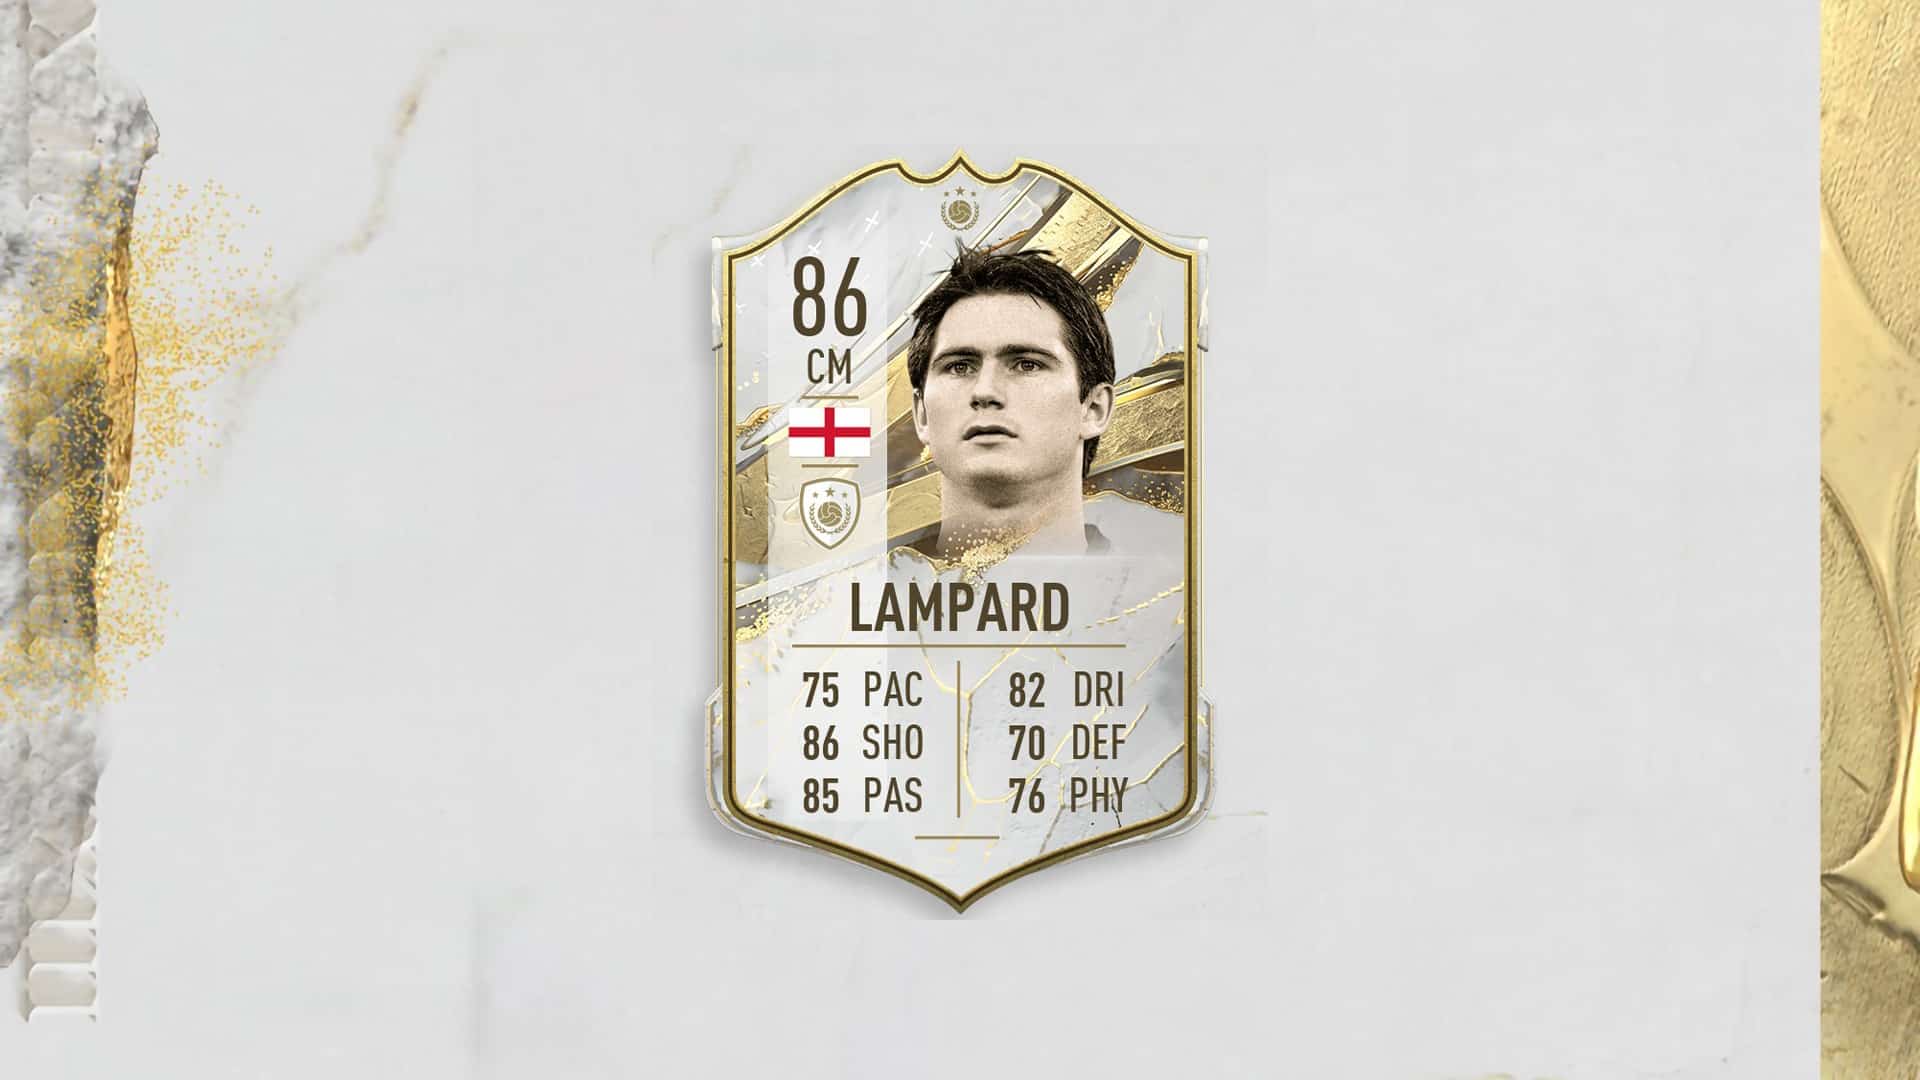 Fifa 23 Lampard Base Icon Sbc Is Available Now Fifaultimateteam It Uk